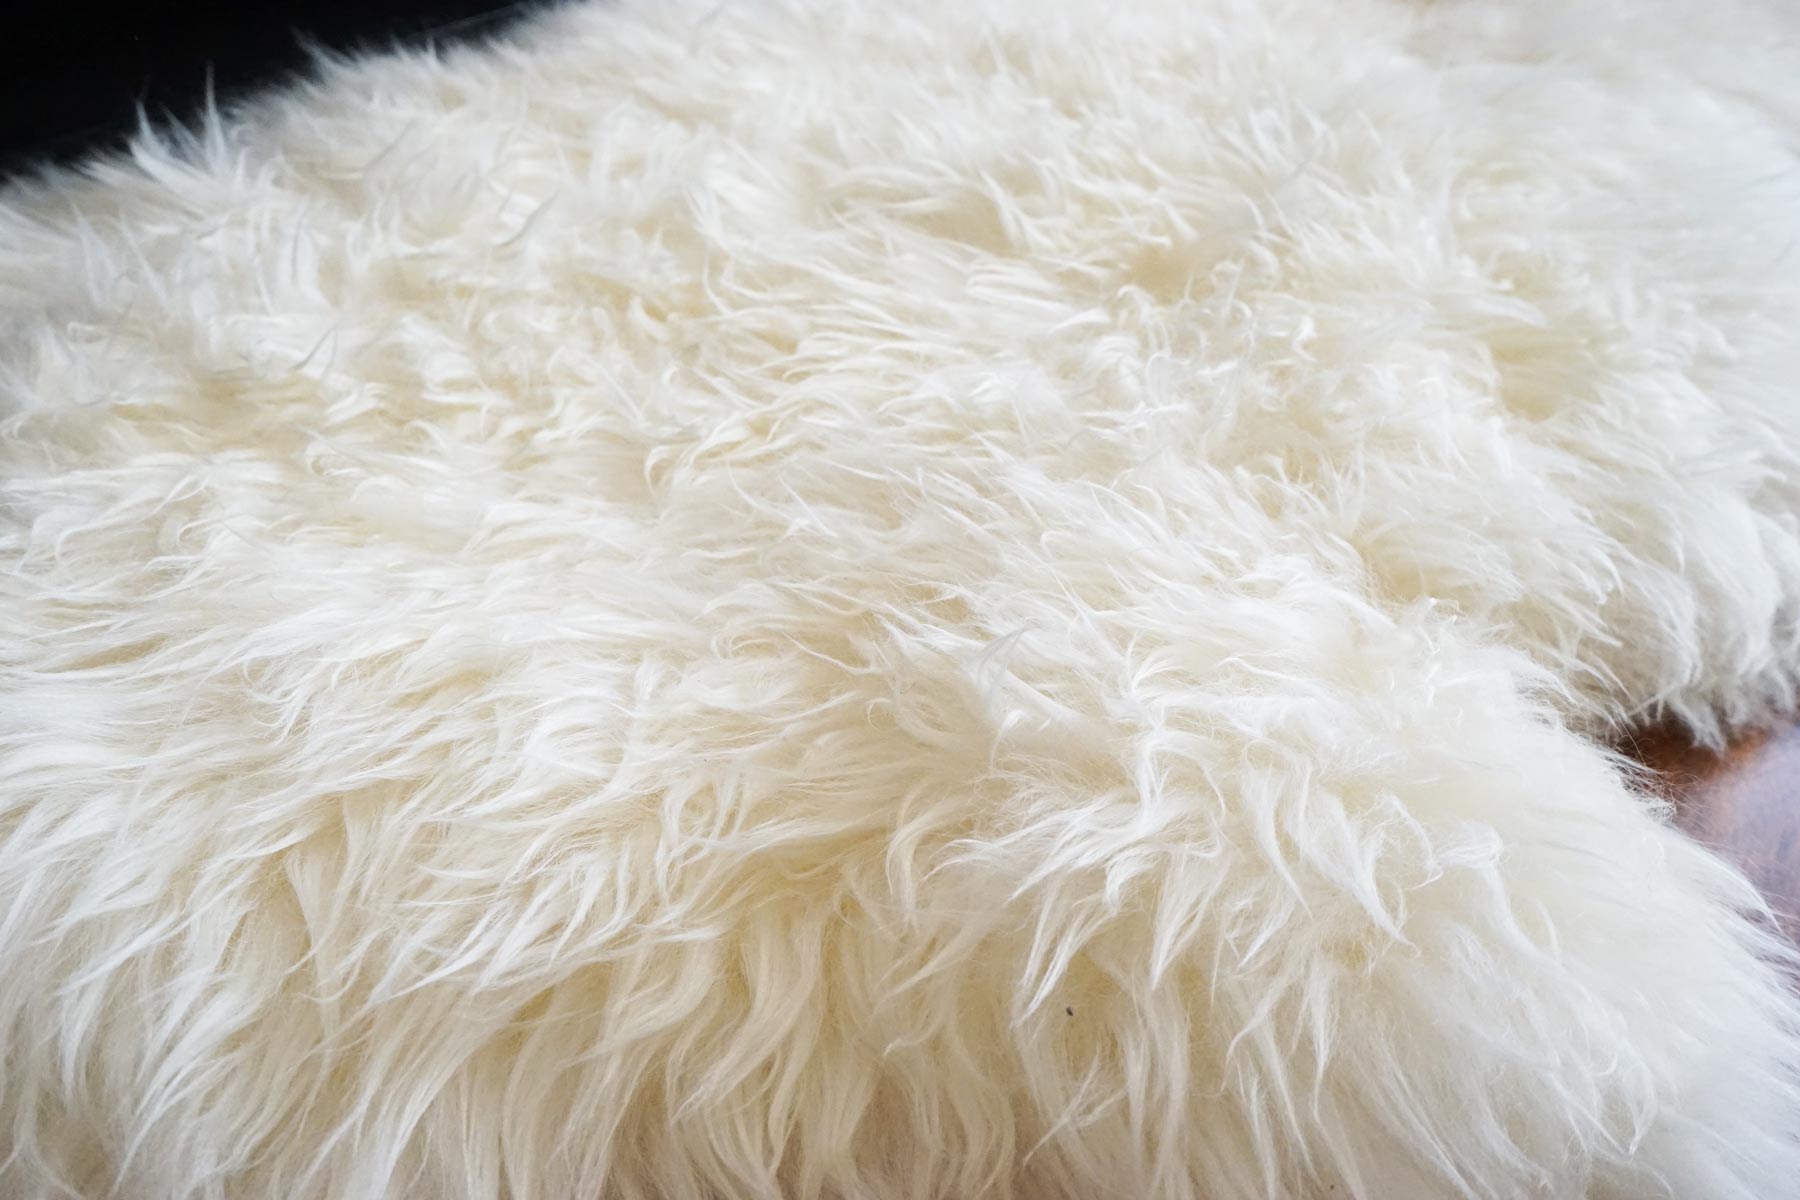 Authentic Australia Sheepskin 100% fur ivory home decoration carpet rug 2.8x6ft - Rodeo Cowhide Rugs